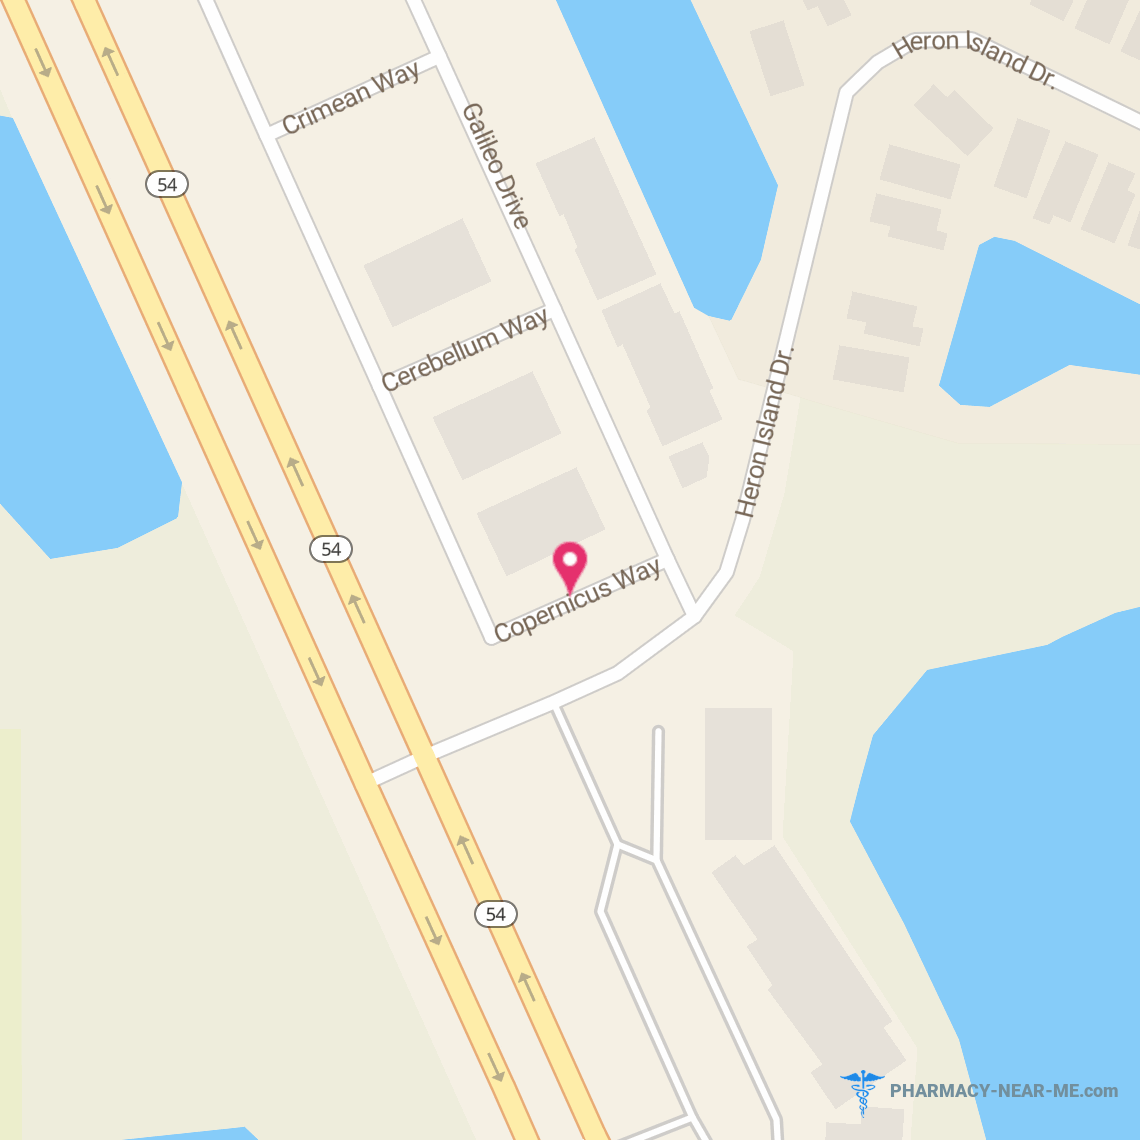 HUNTING CREEK POINTE PHARMACY - Pharmacy Hours, Phone, Reviews & Information: 8147 Copernicus Way, New Port Richey, Florida 34655, United States